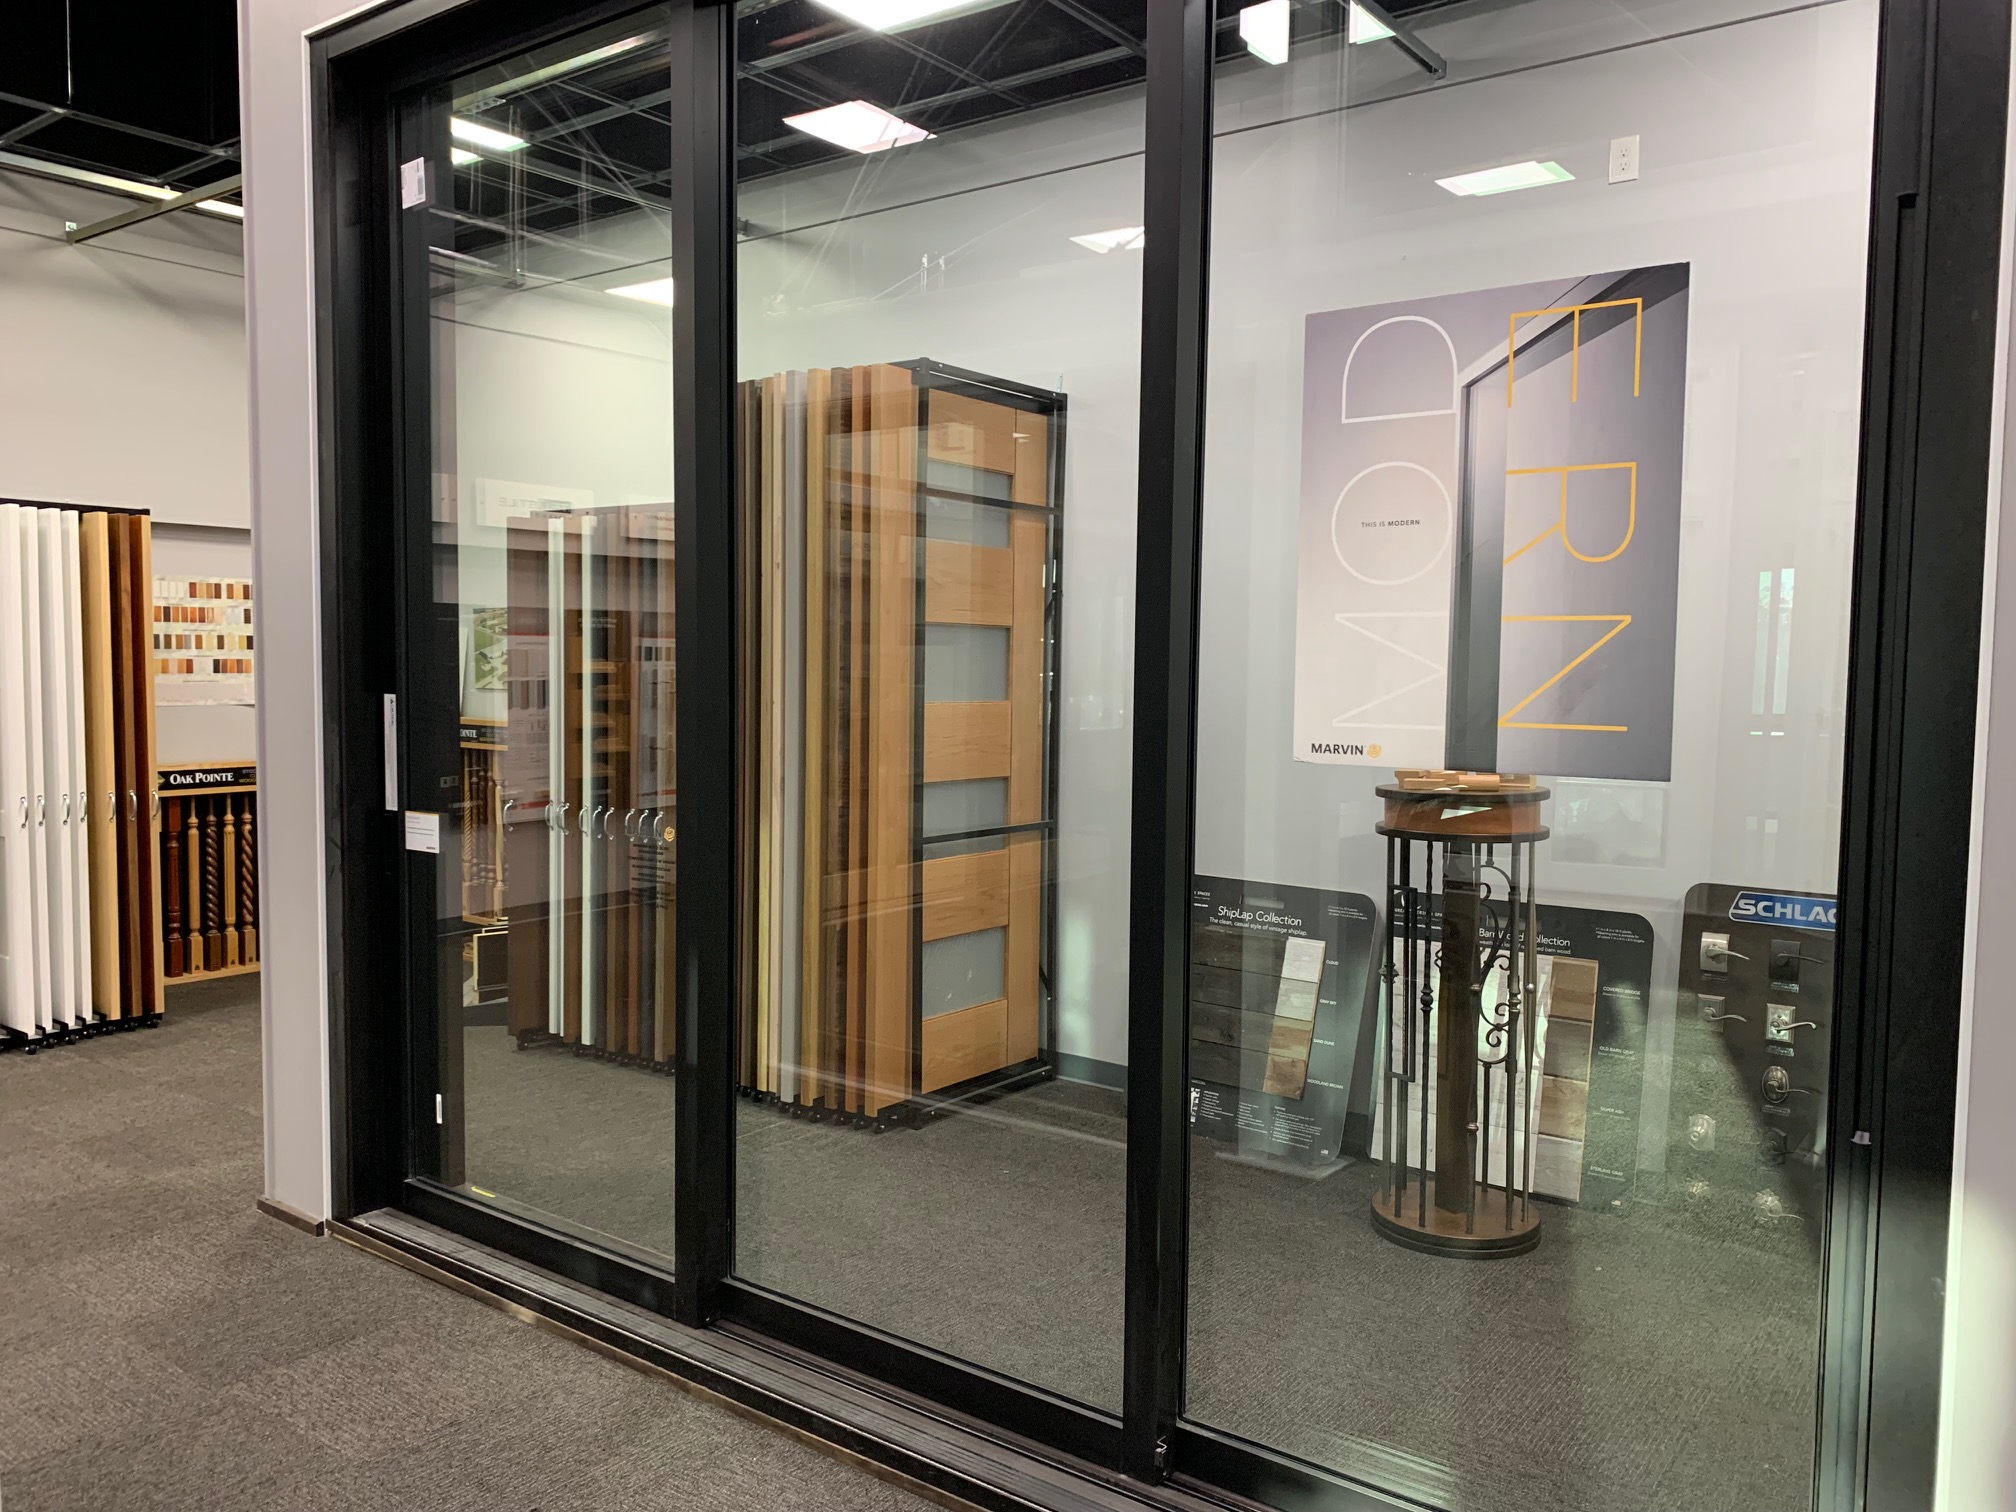 Large windows on display in our showroom